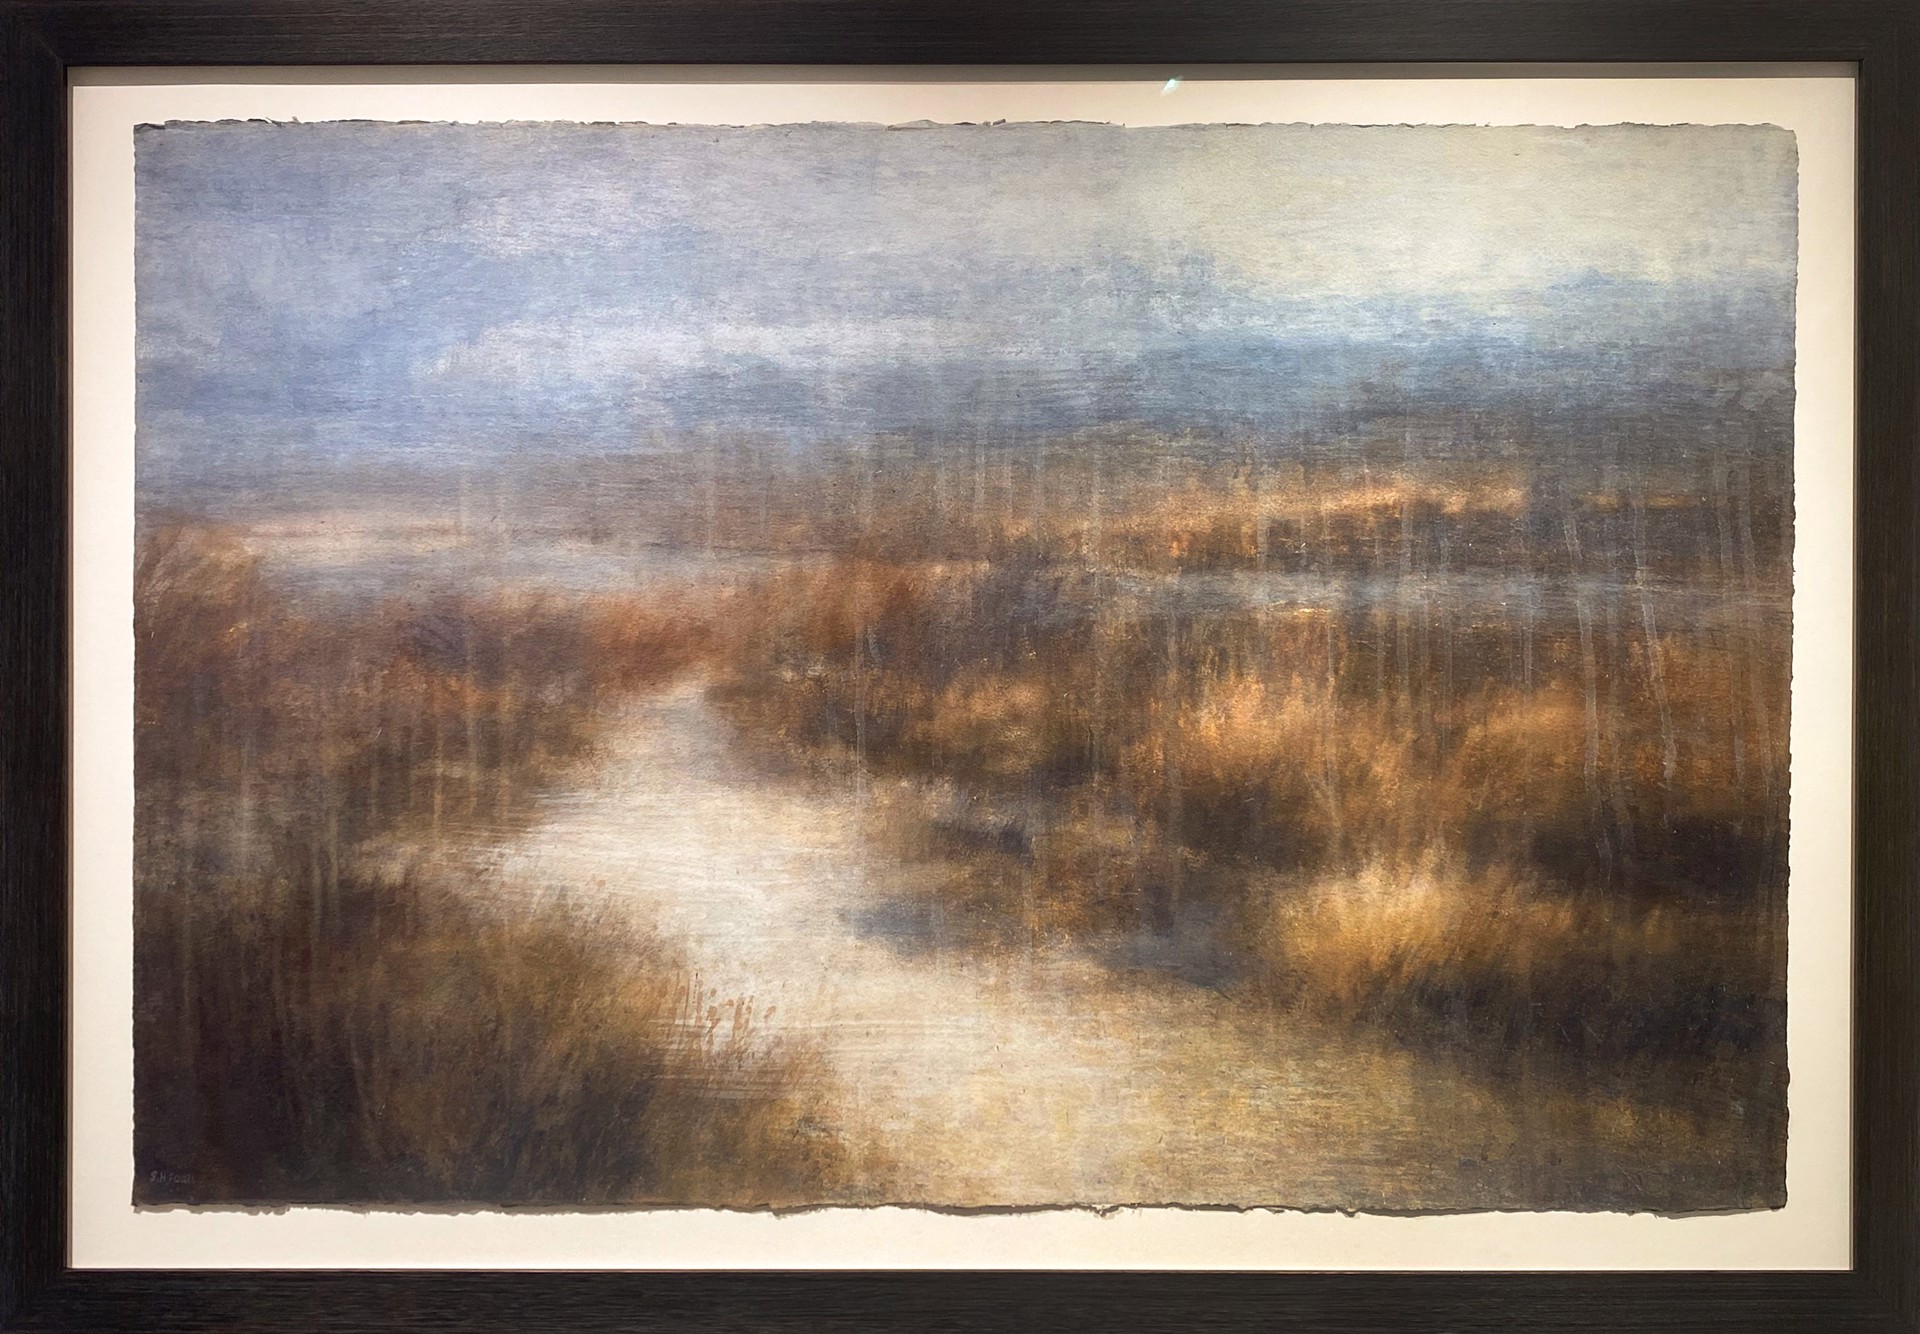 Marshes by Susan Hope Fogel